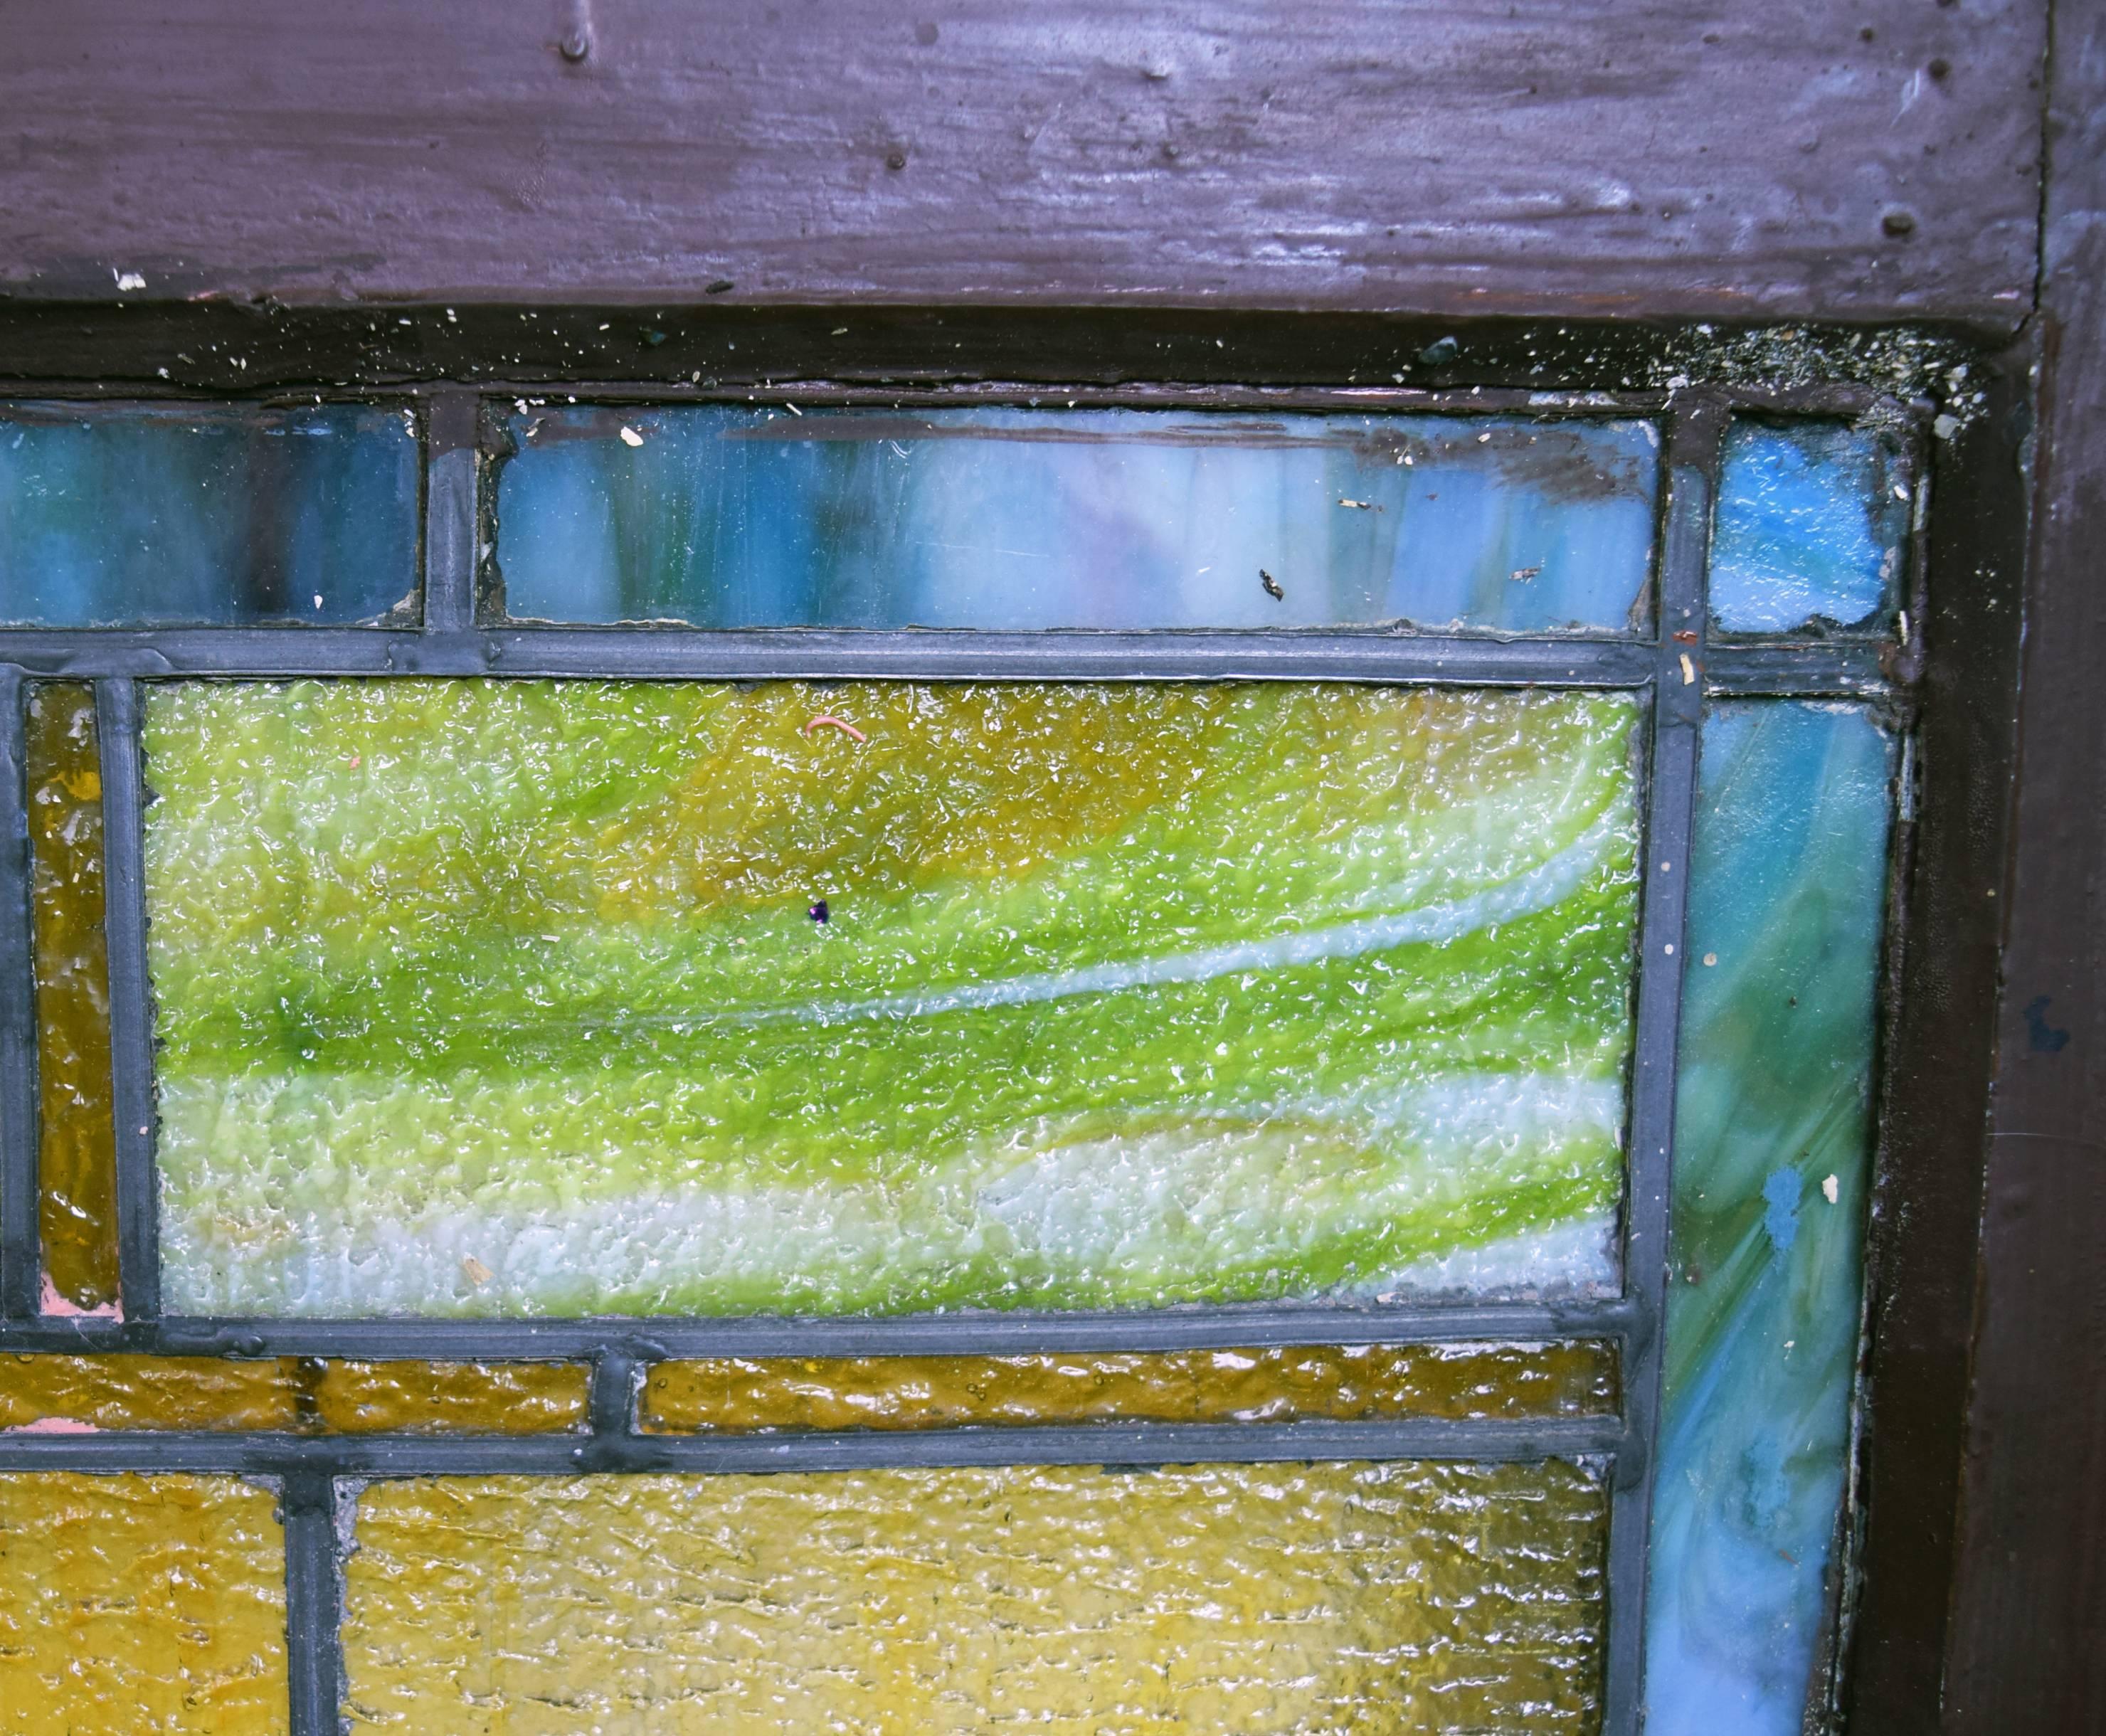 This beautiful Arts & Crafts window features a wonderfully detailed yet subtle hand painted rondelle, bright yellow textured glass panels, slag glass green, blue, and multicolored smaller panels and deep green leaf designs surrounding the rondelle.